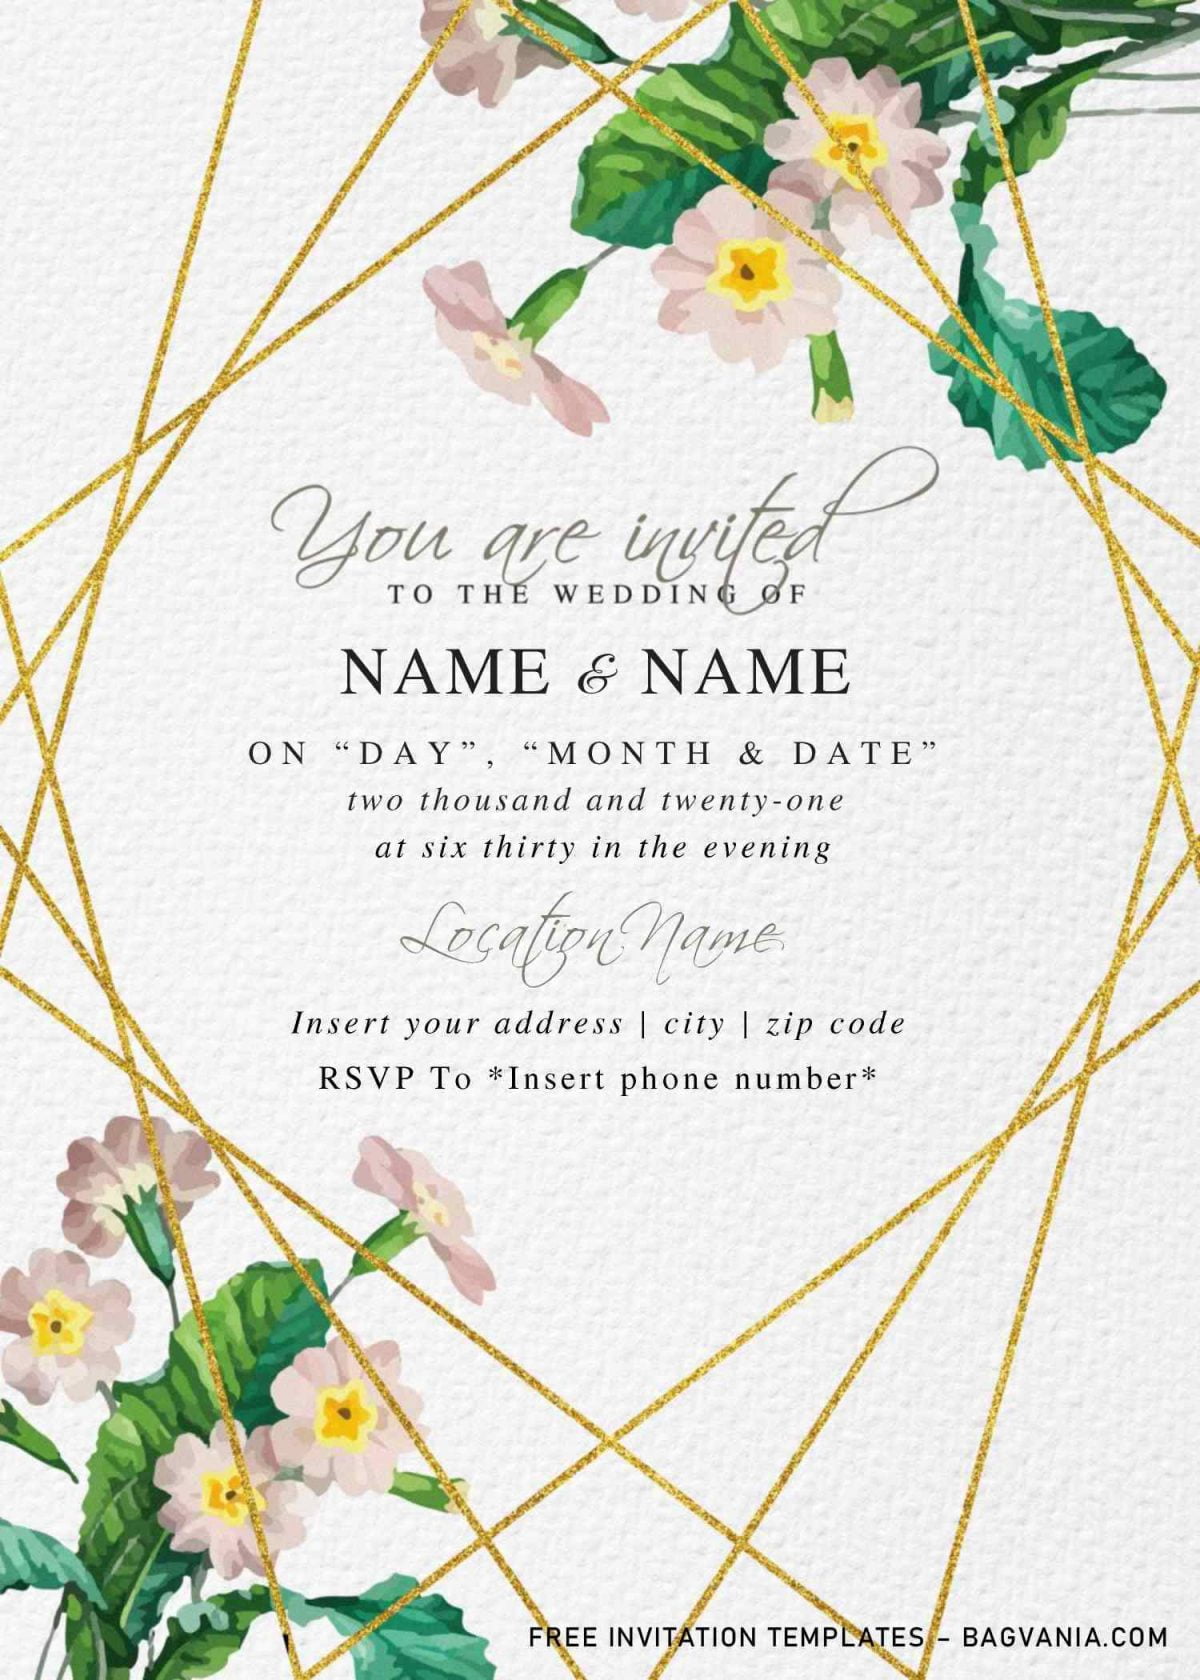 Free Botanical Floral Wedding Invitation Templates For Word and has portrait orientation